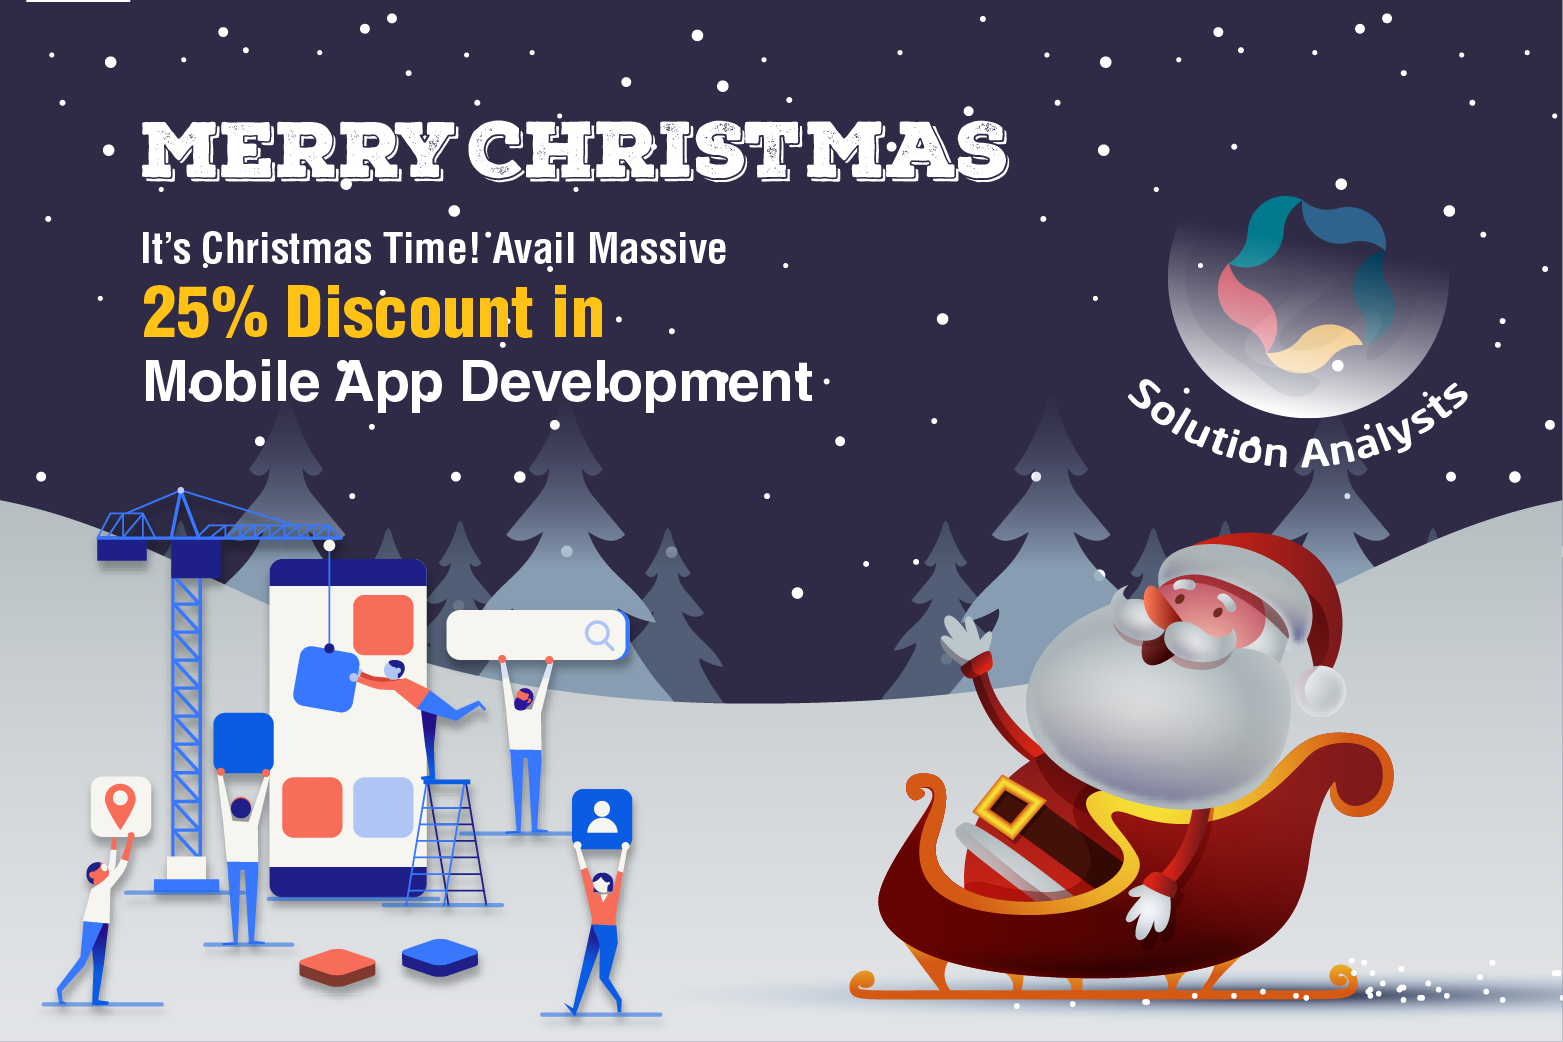 Solution Analysts Offers Christmas Gift with Massive Discount on Mobile App Development